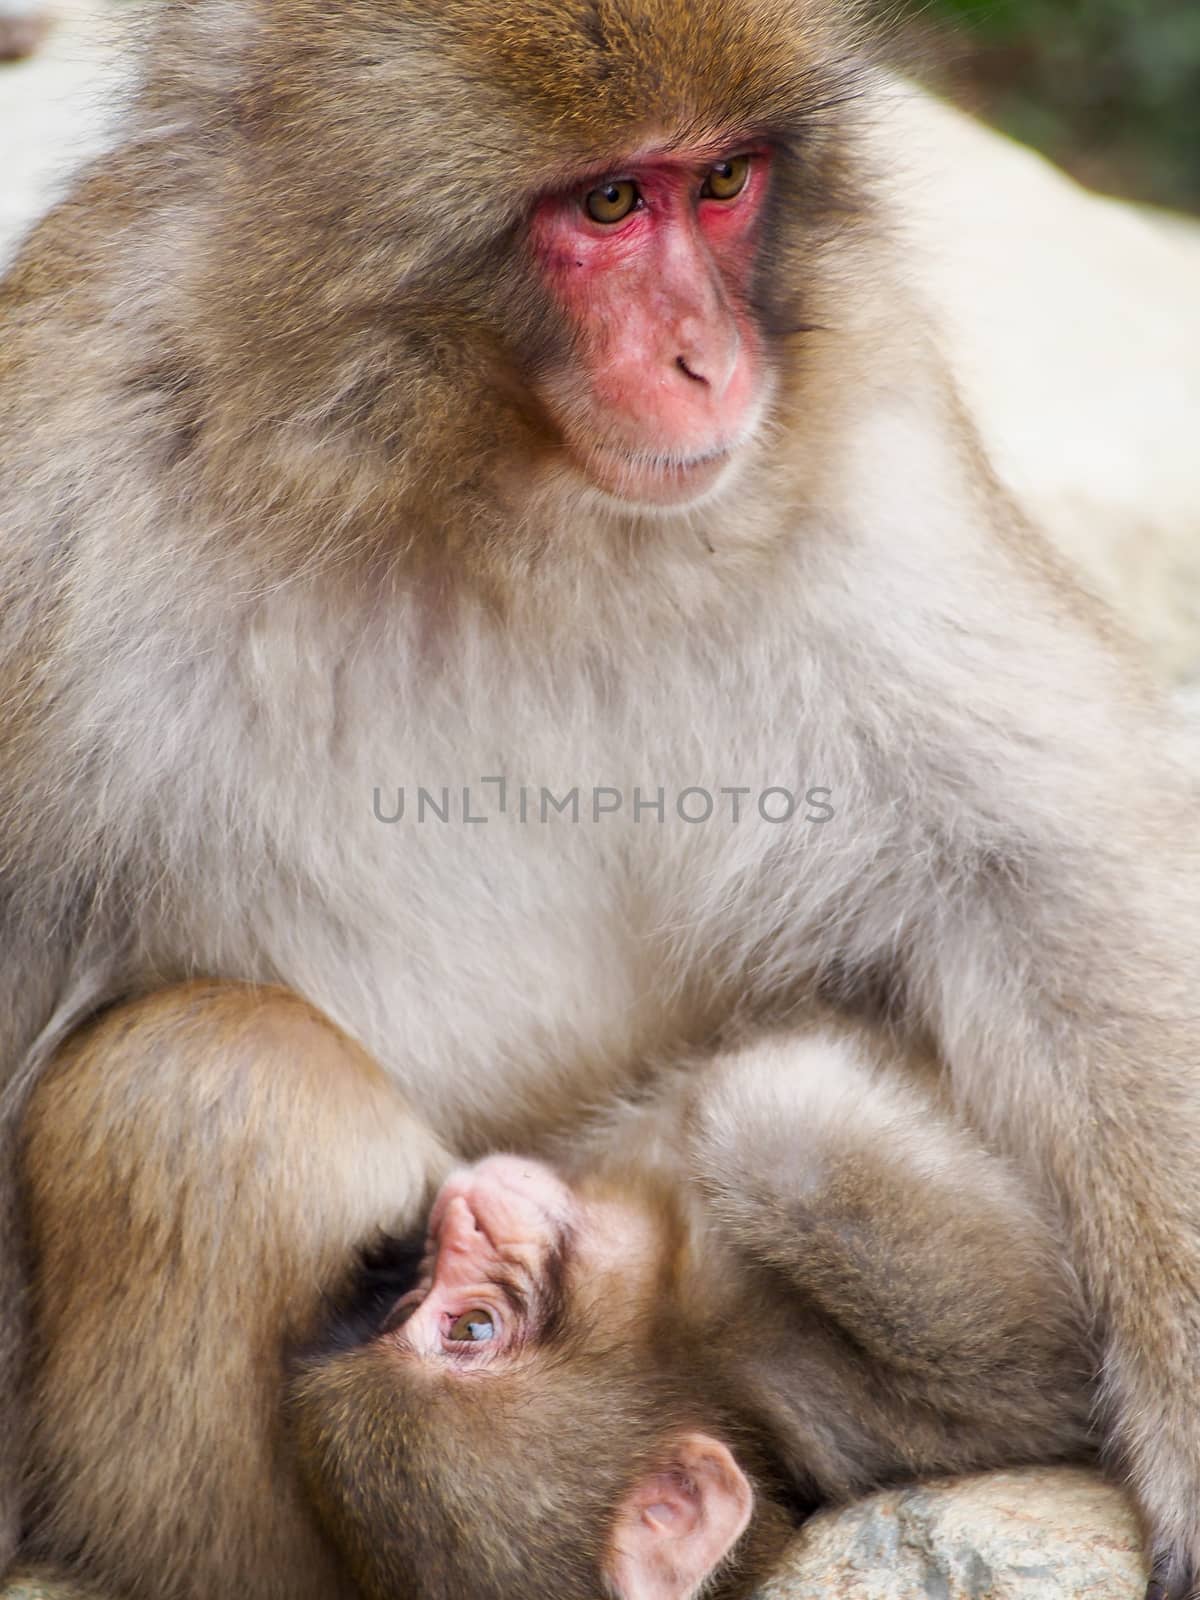 A mother and child snow monkey, or Japanese macaque, snuggling together. 